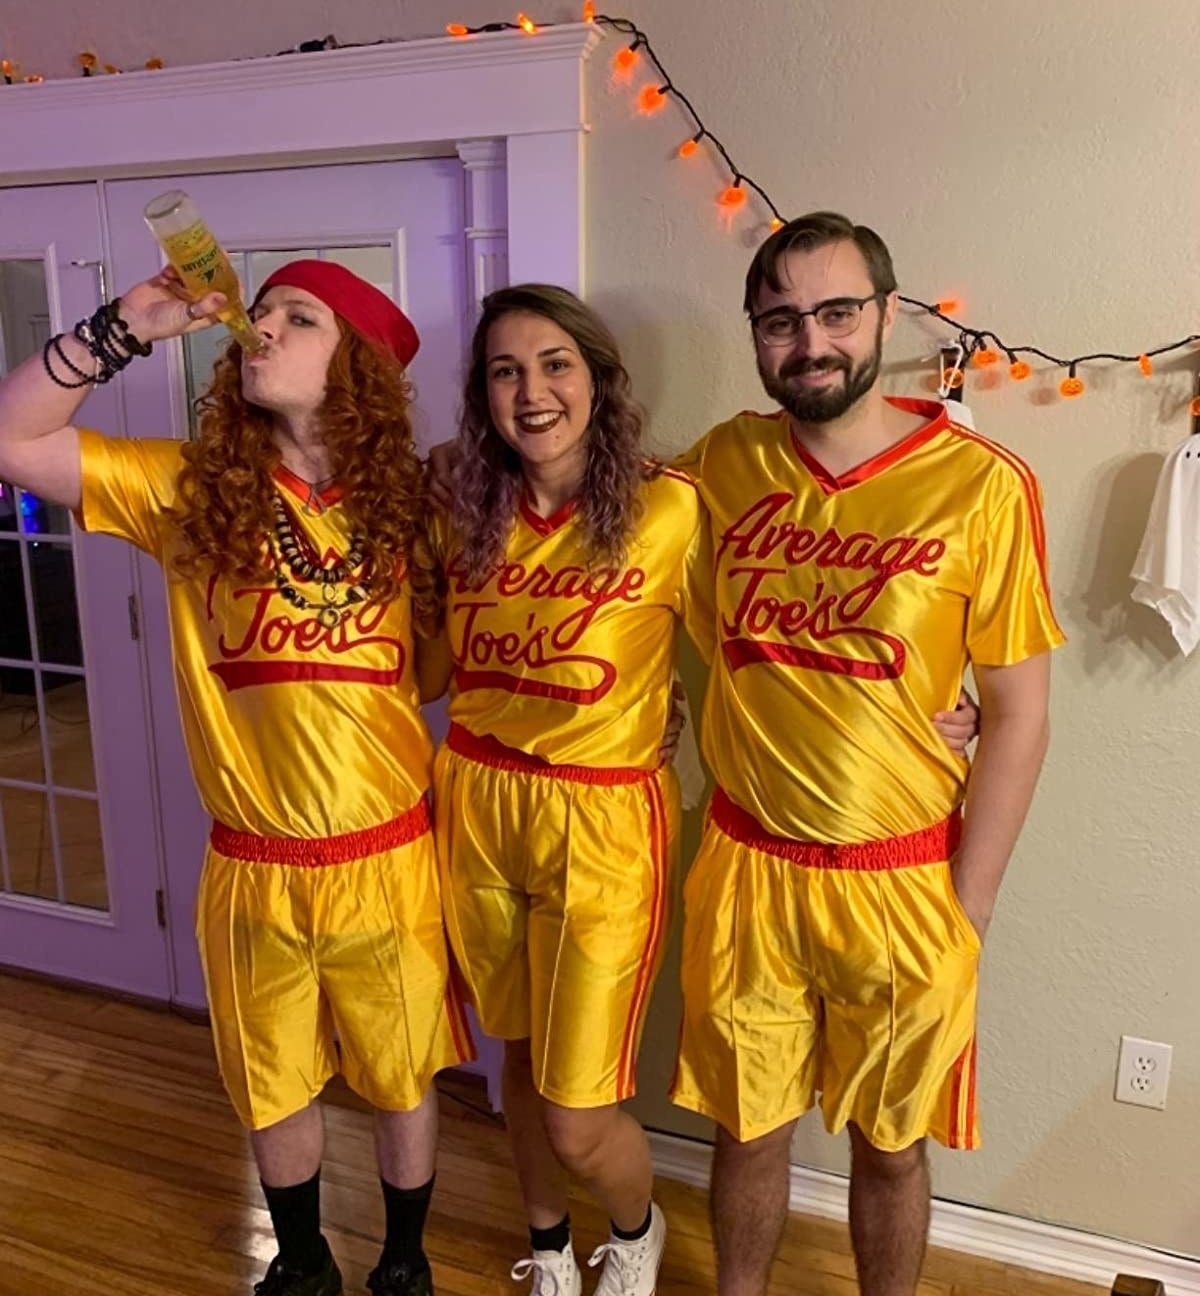 a reviewer photo of three people dressed in the matching jersey sets